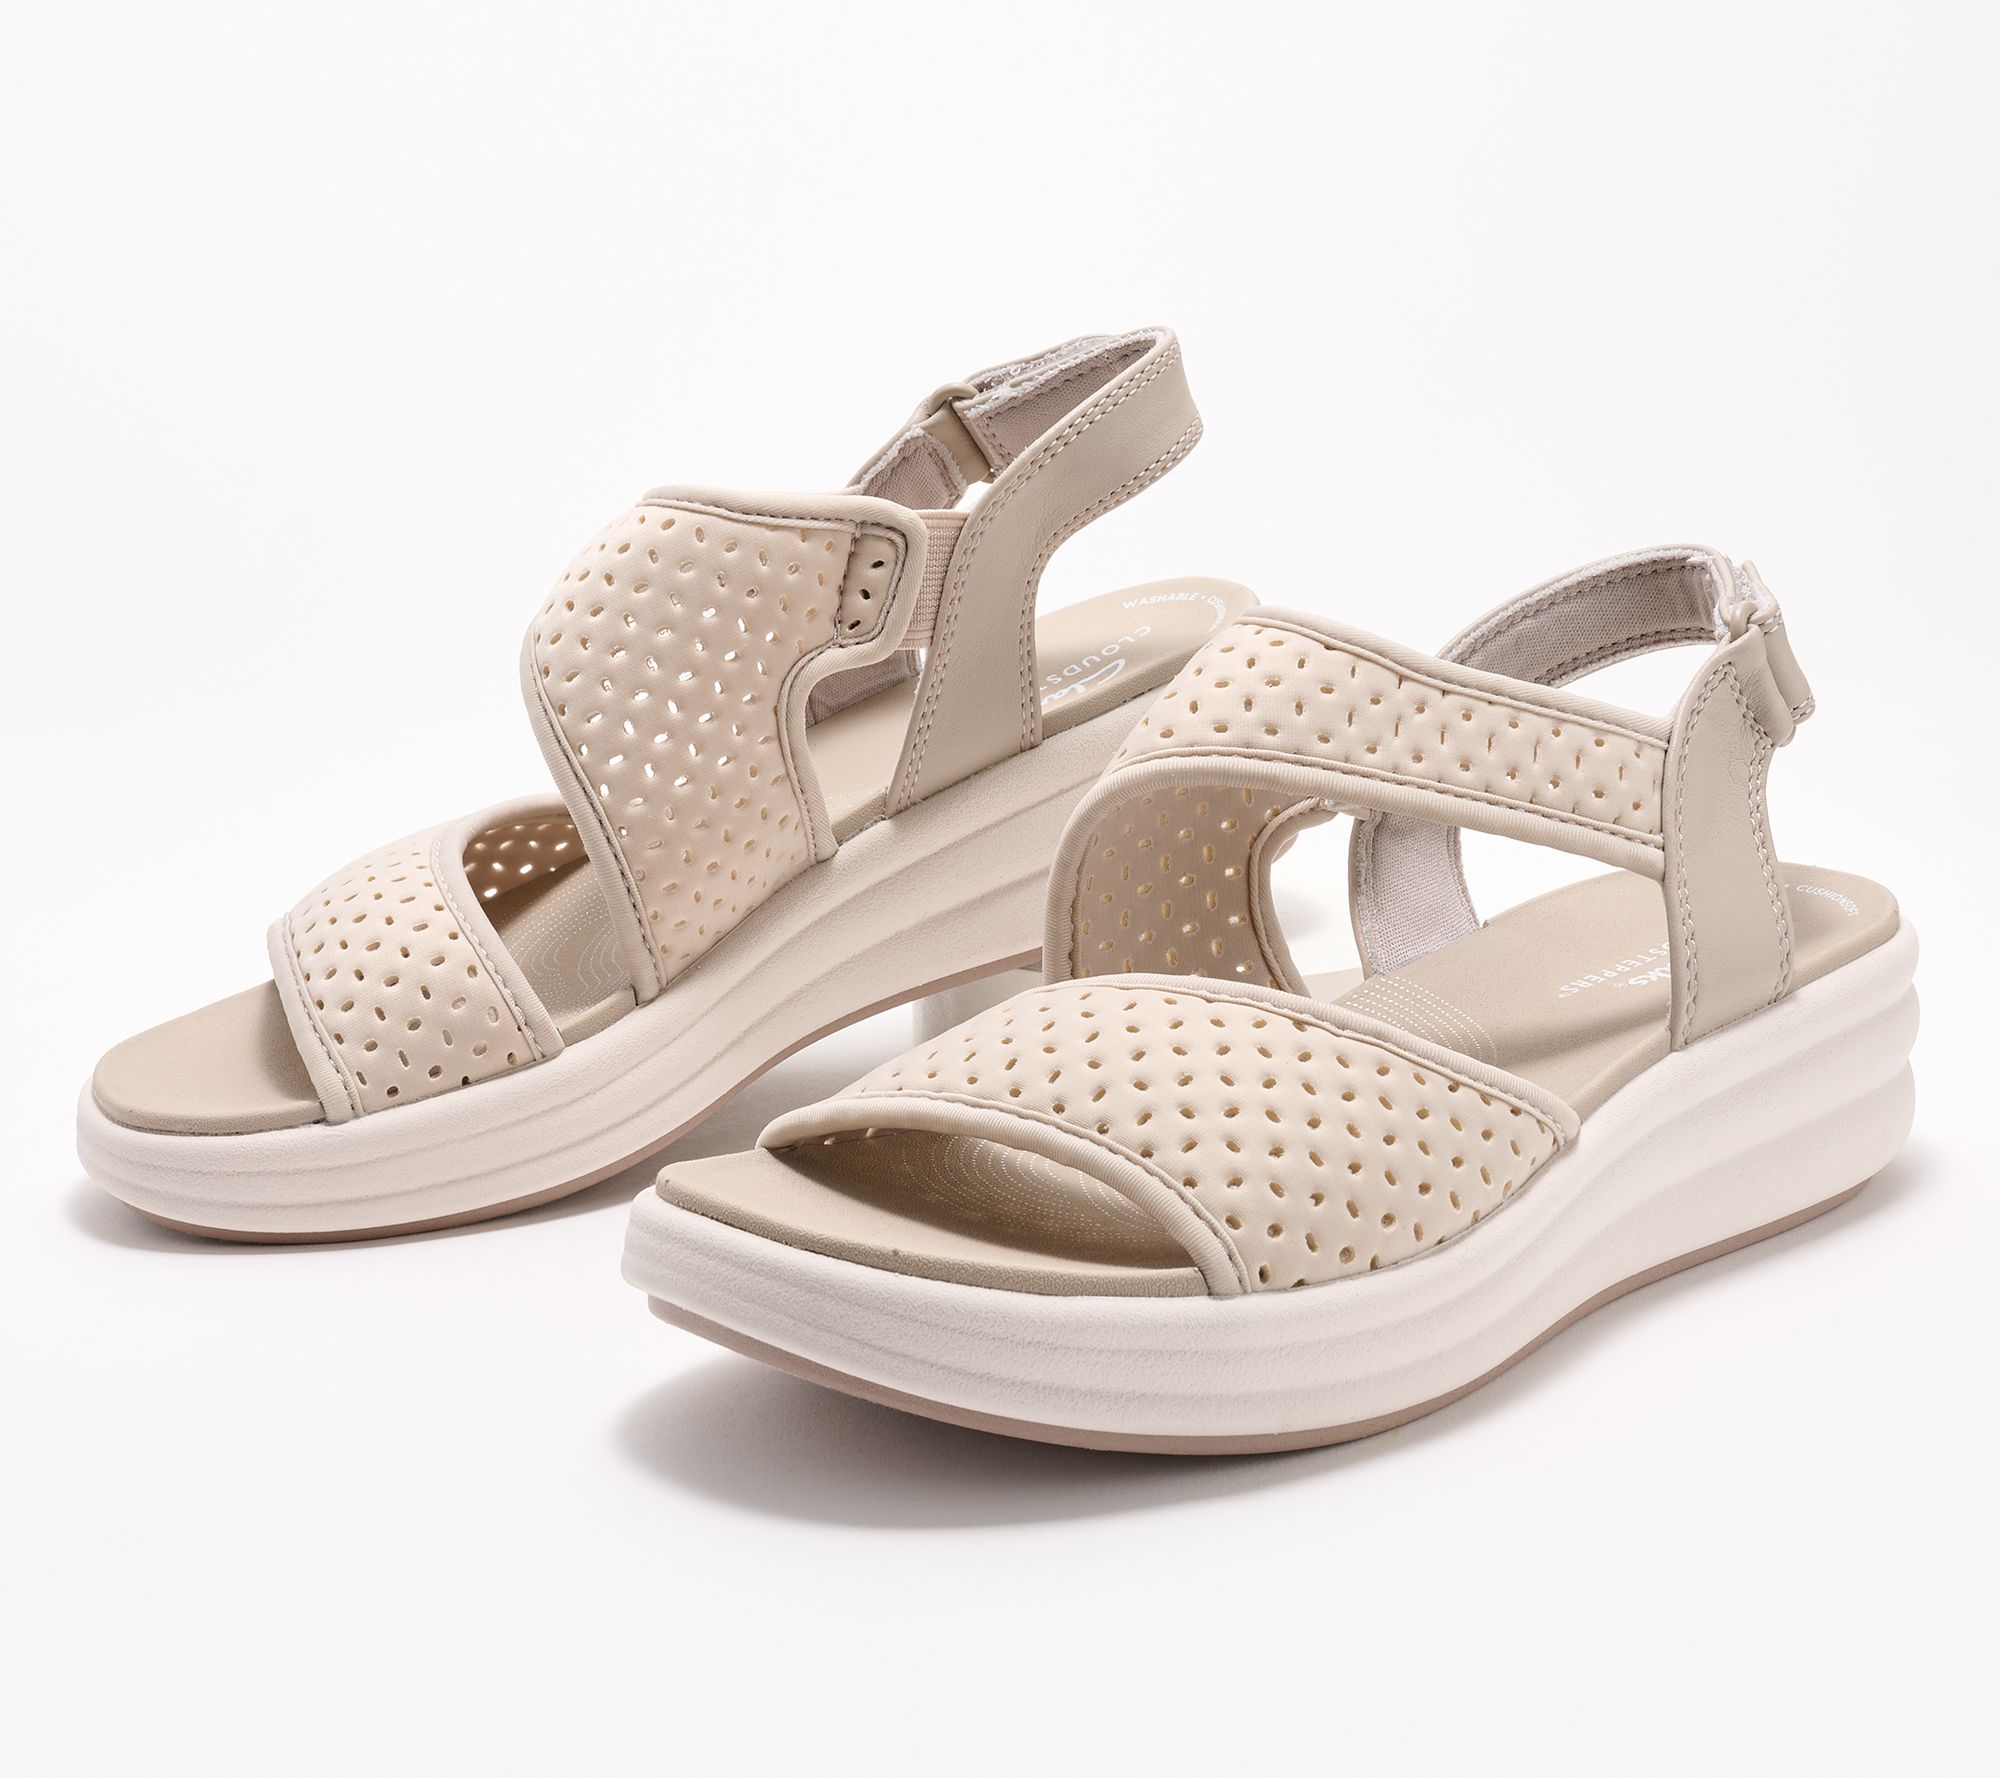 Clarks Cloudsteppers Perforated Sandal -Drift - QVC.com